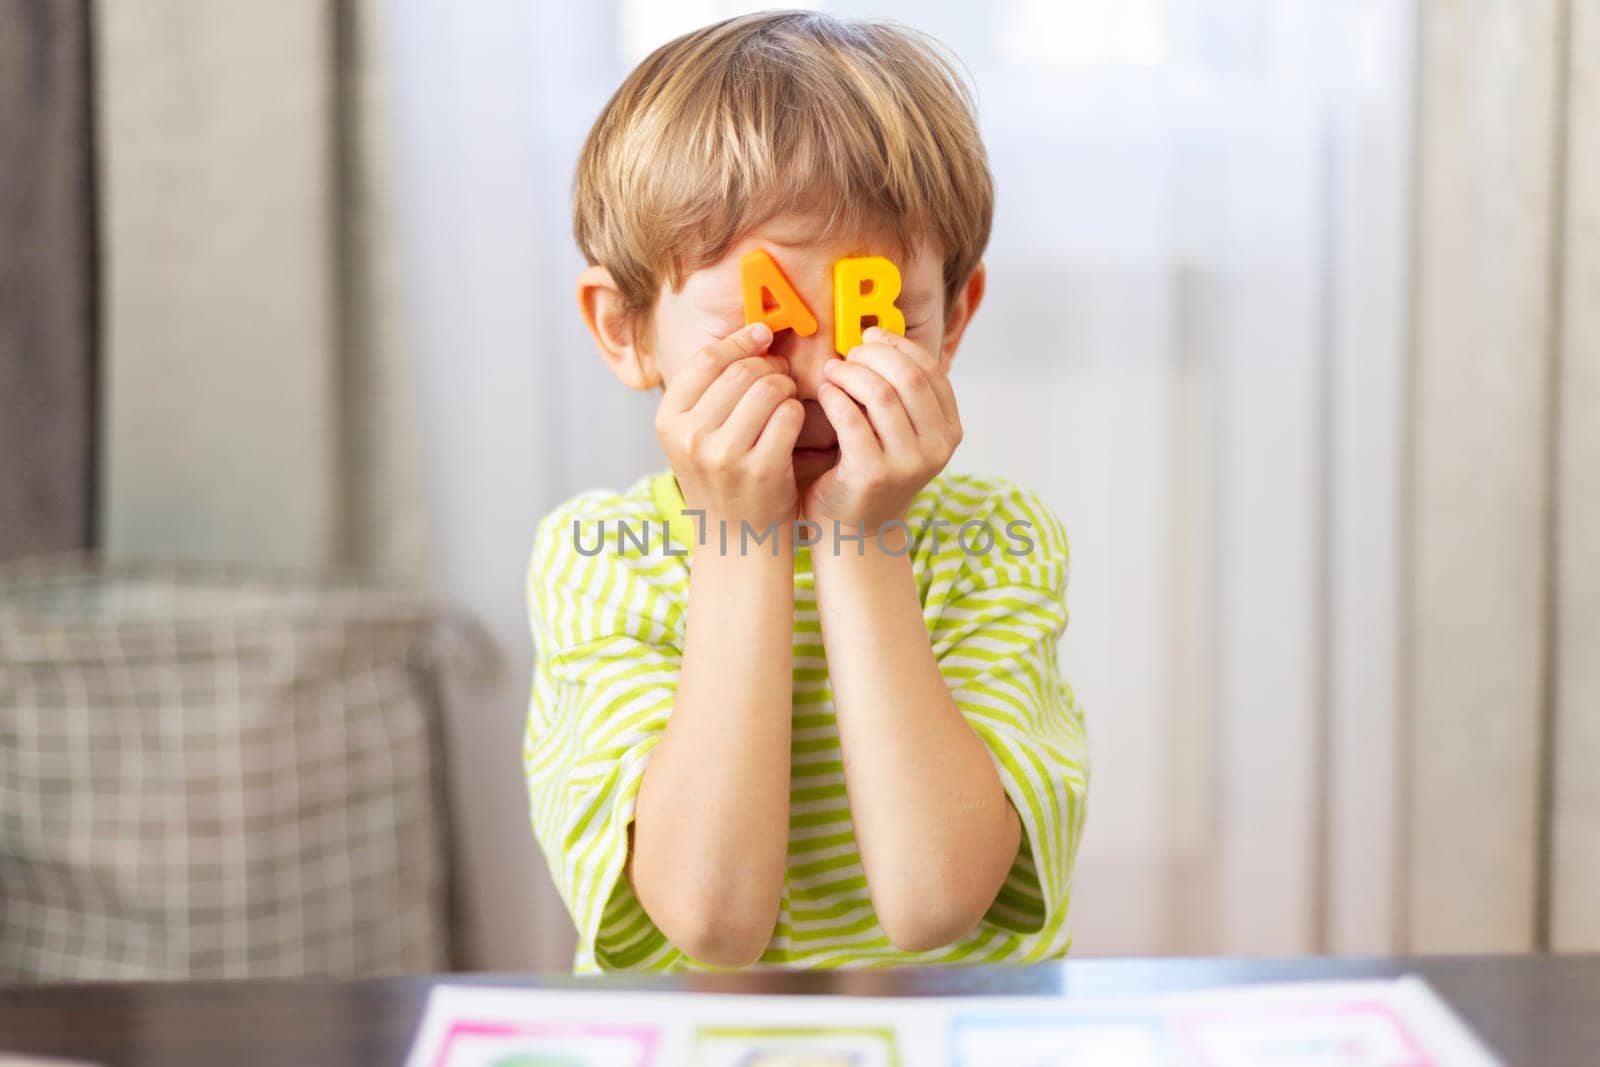 A young boy in a striped shirt engages in playful learning by covering his eyes with colorful alphabet letters, showcasing a moment of joy and early education in a home setting